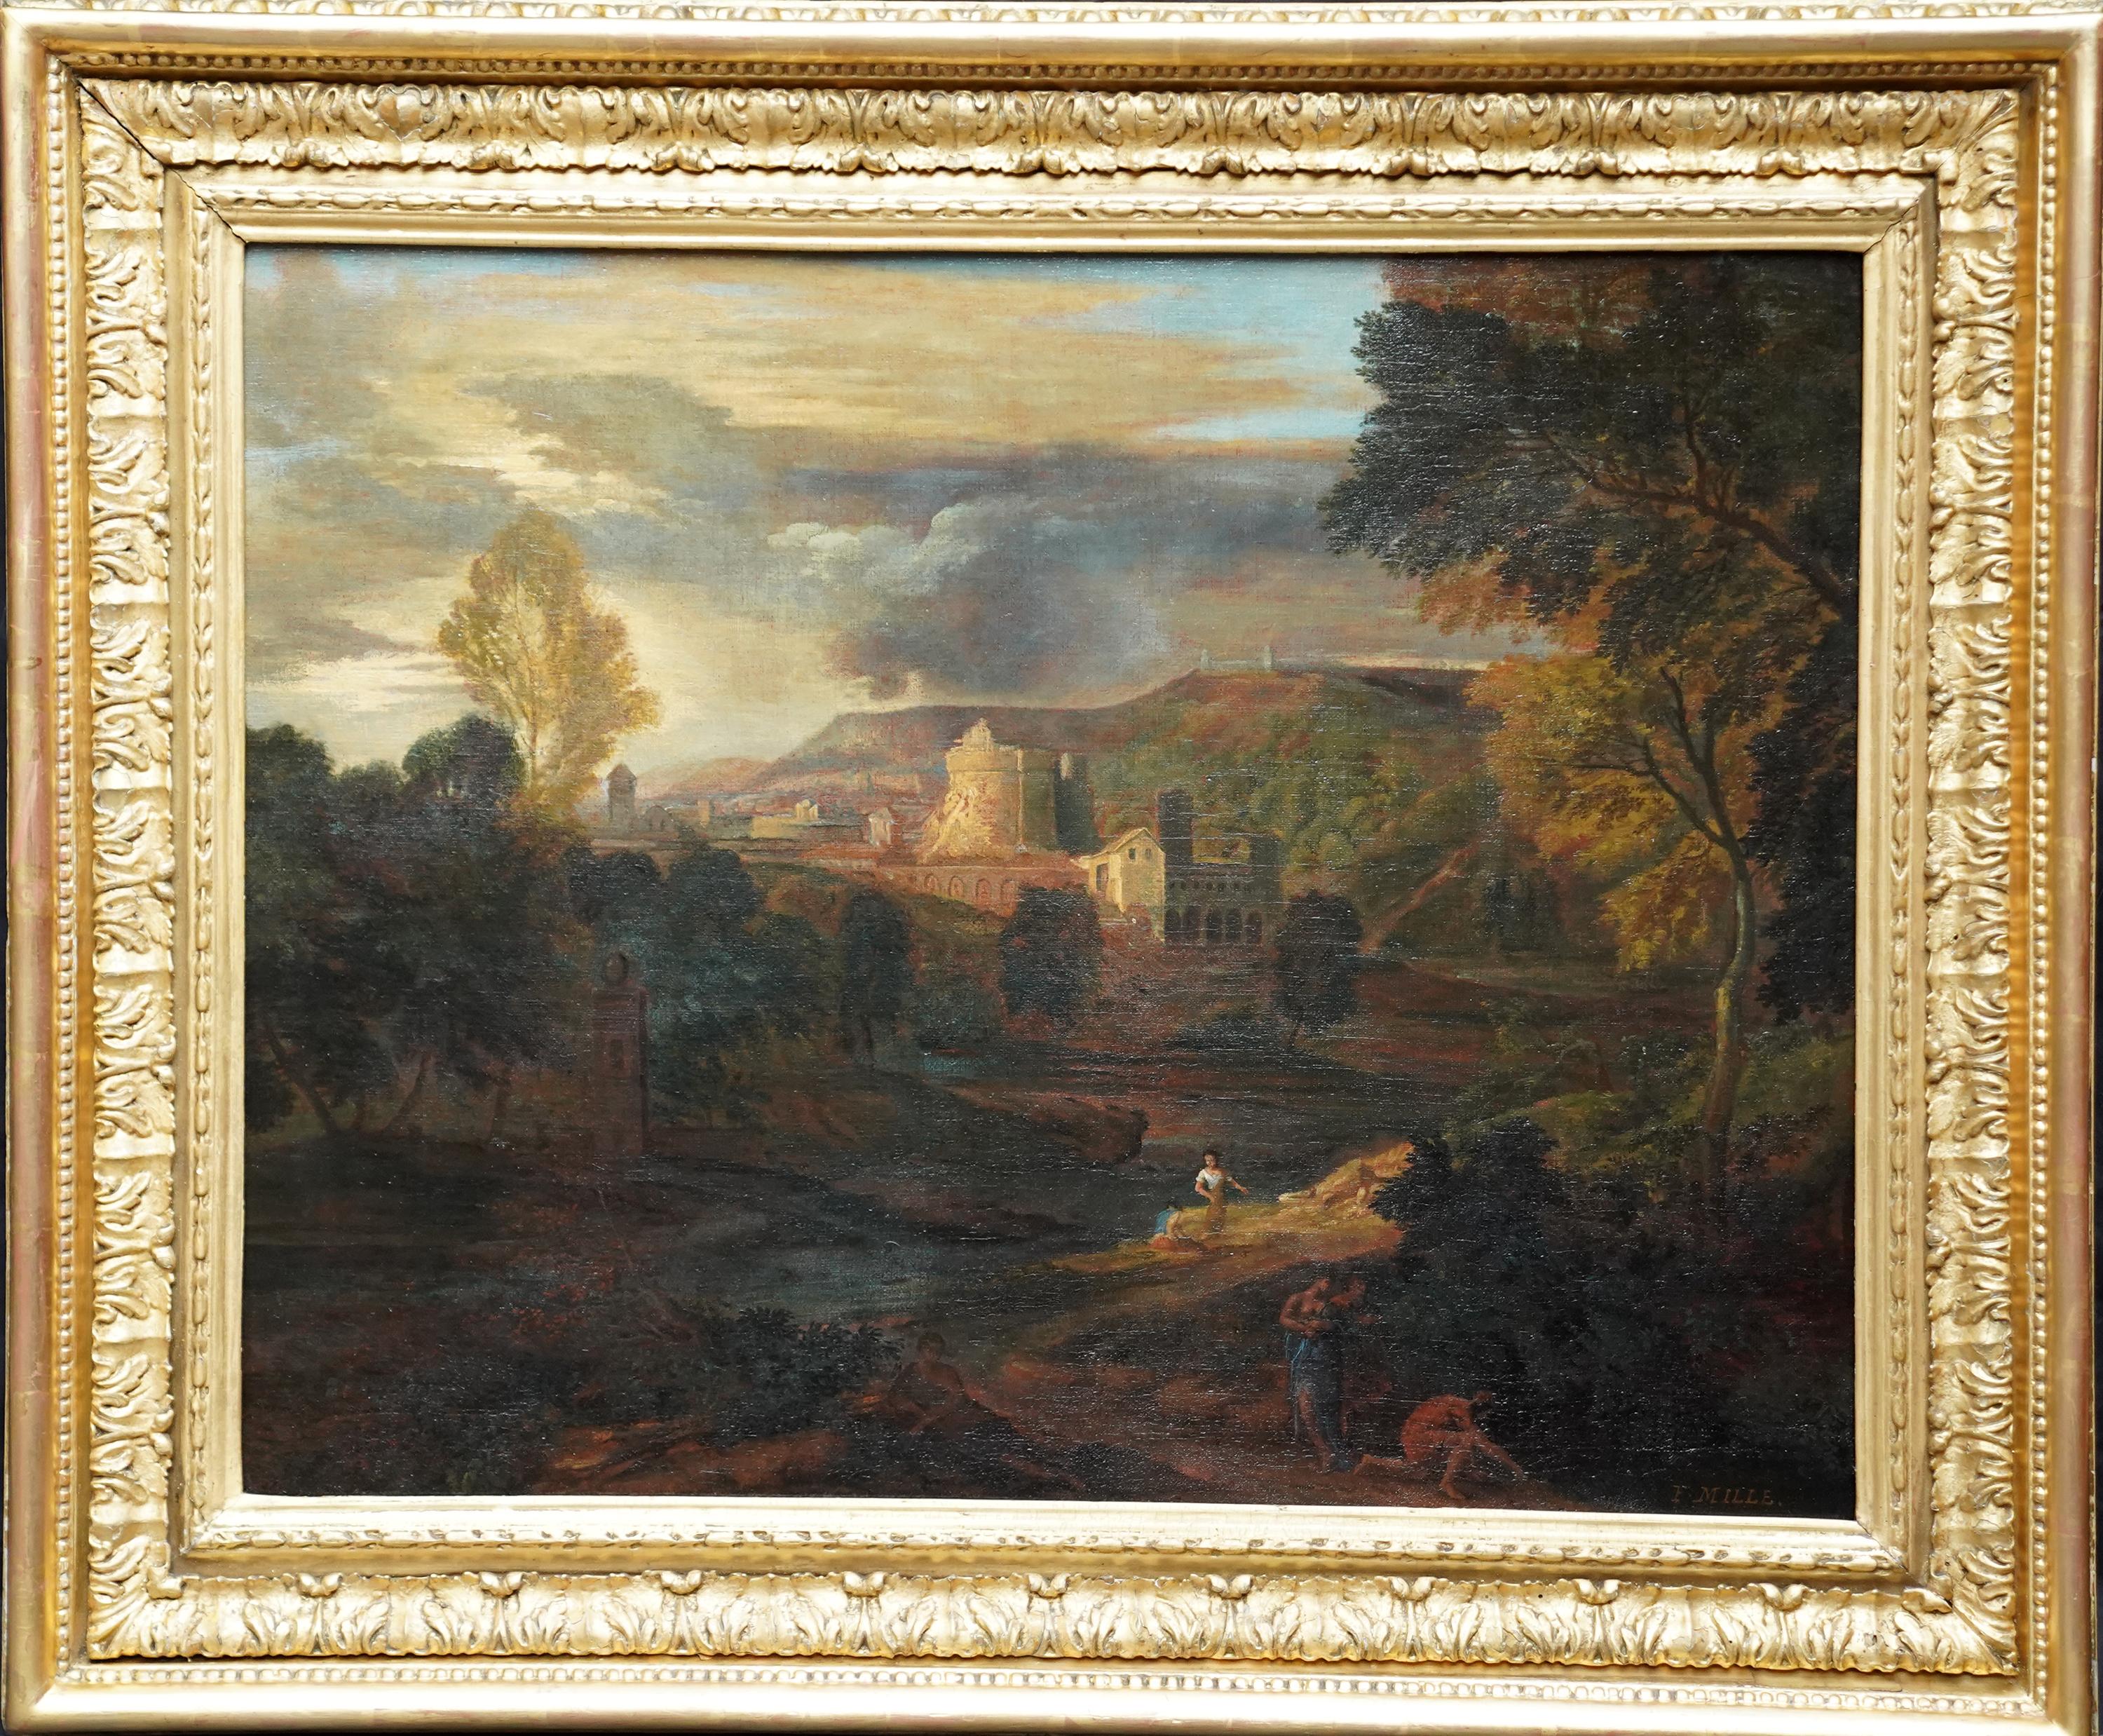 Jean François Millet Landscape Painting - Classical Landscape - French 17th century art Old Master oil painting